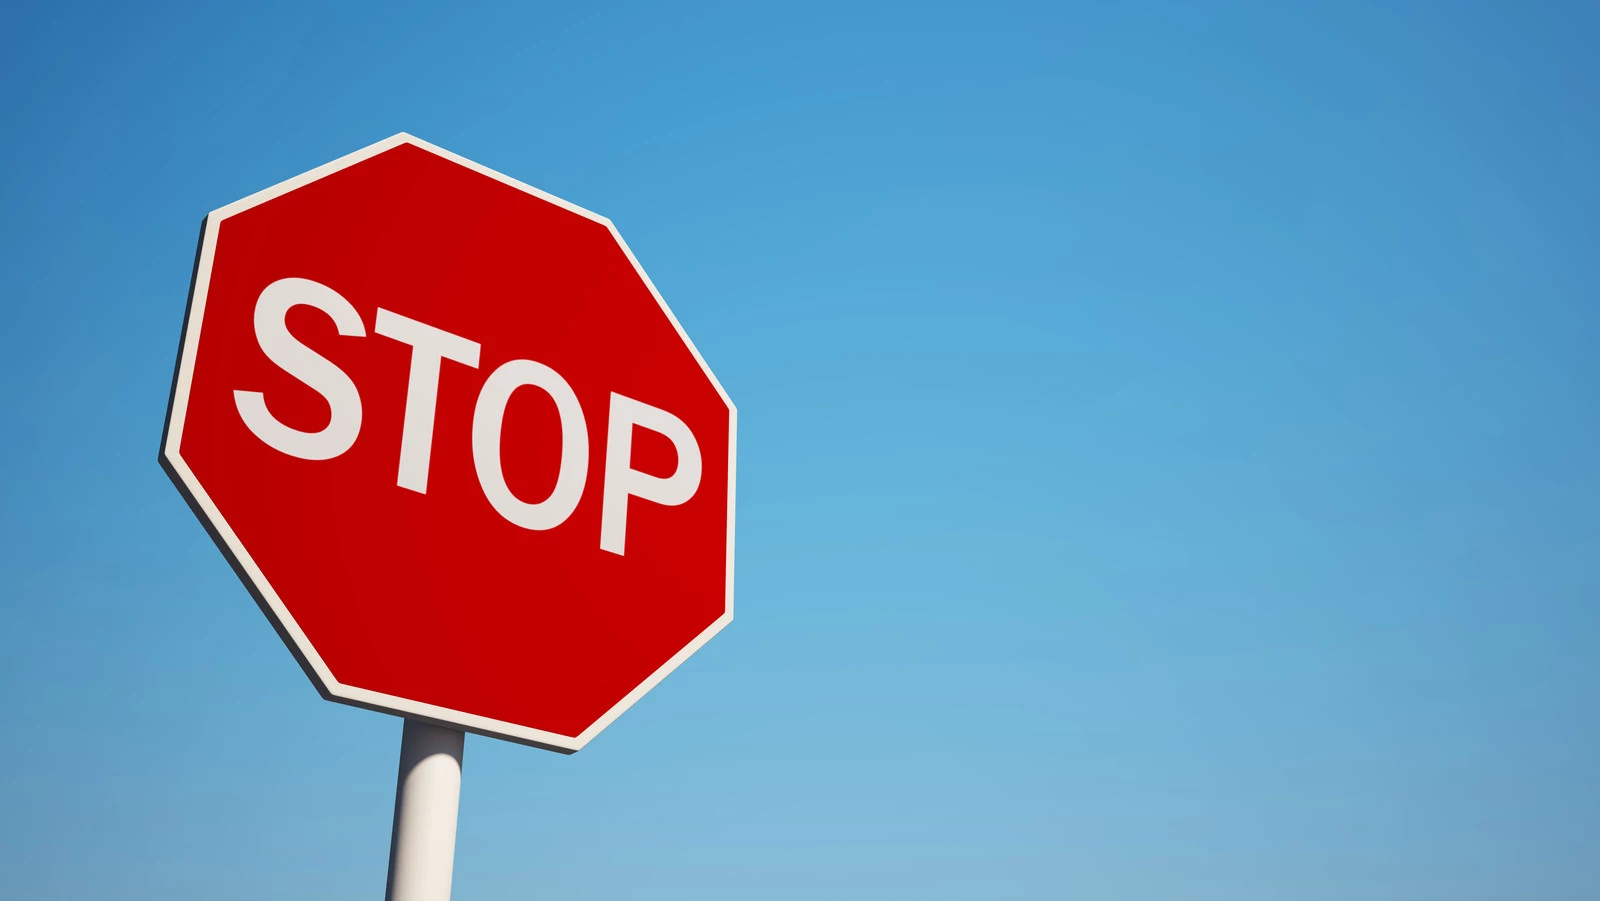 Stop Sign isolated on clean blue sky